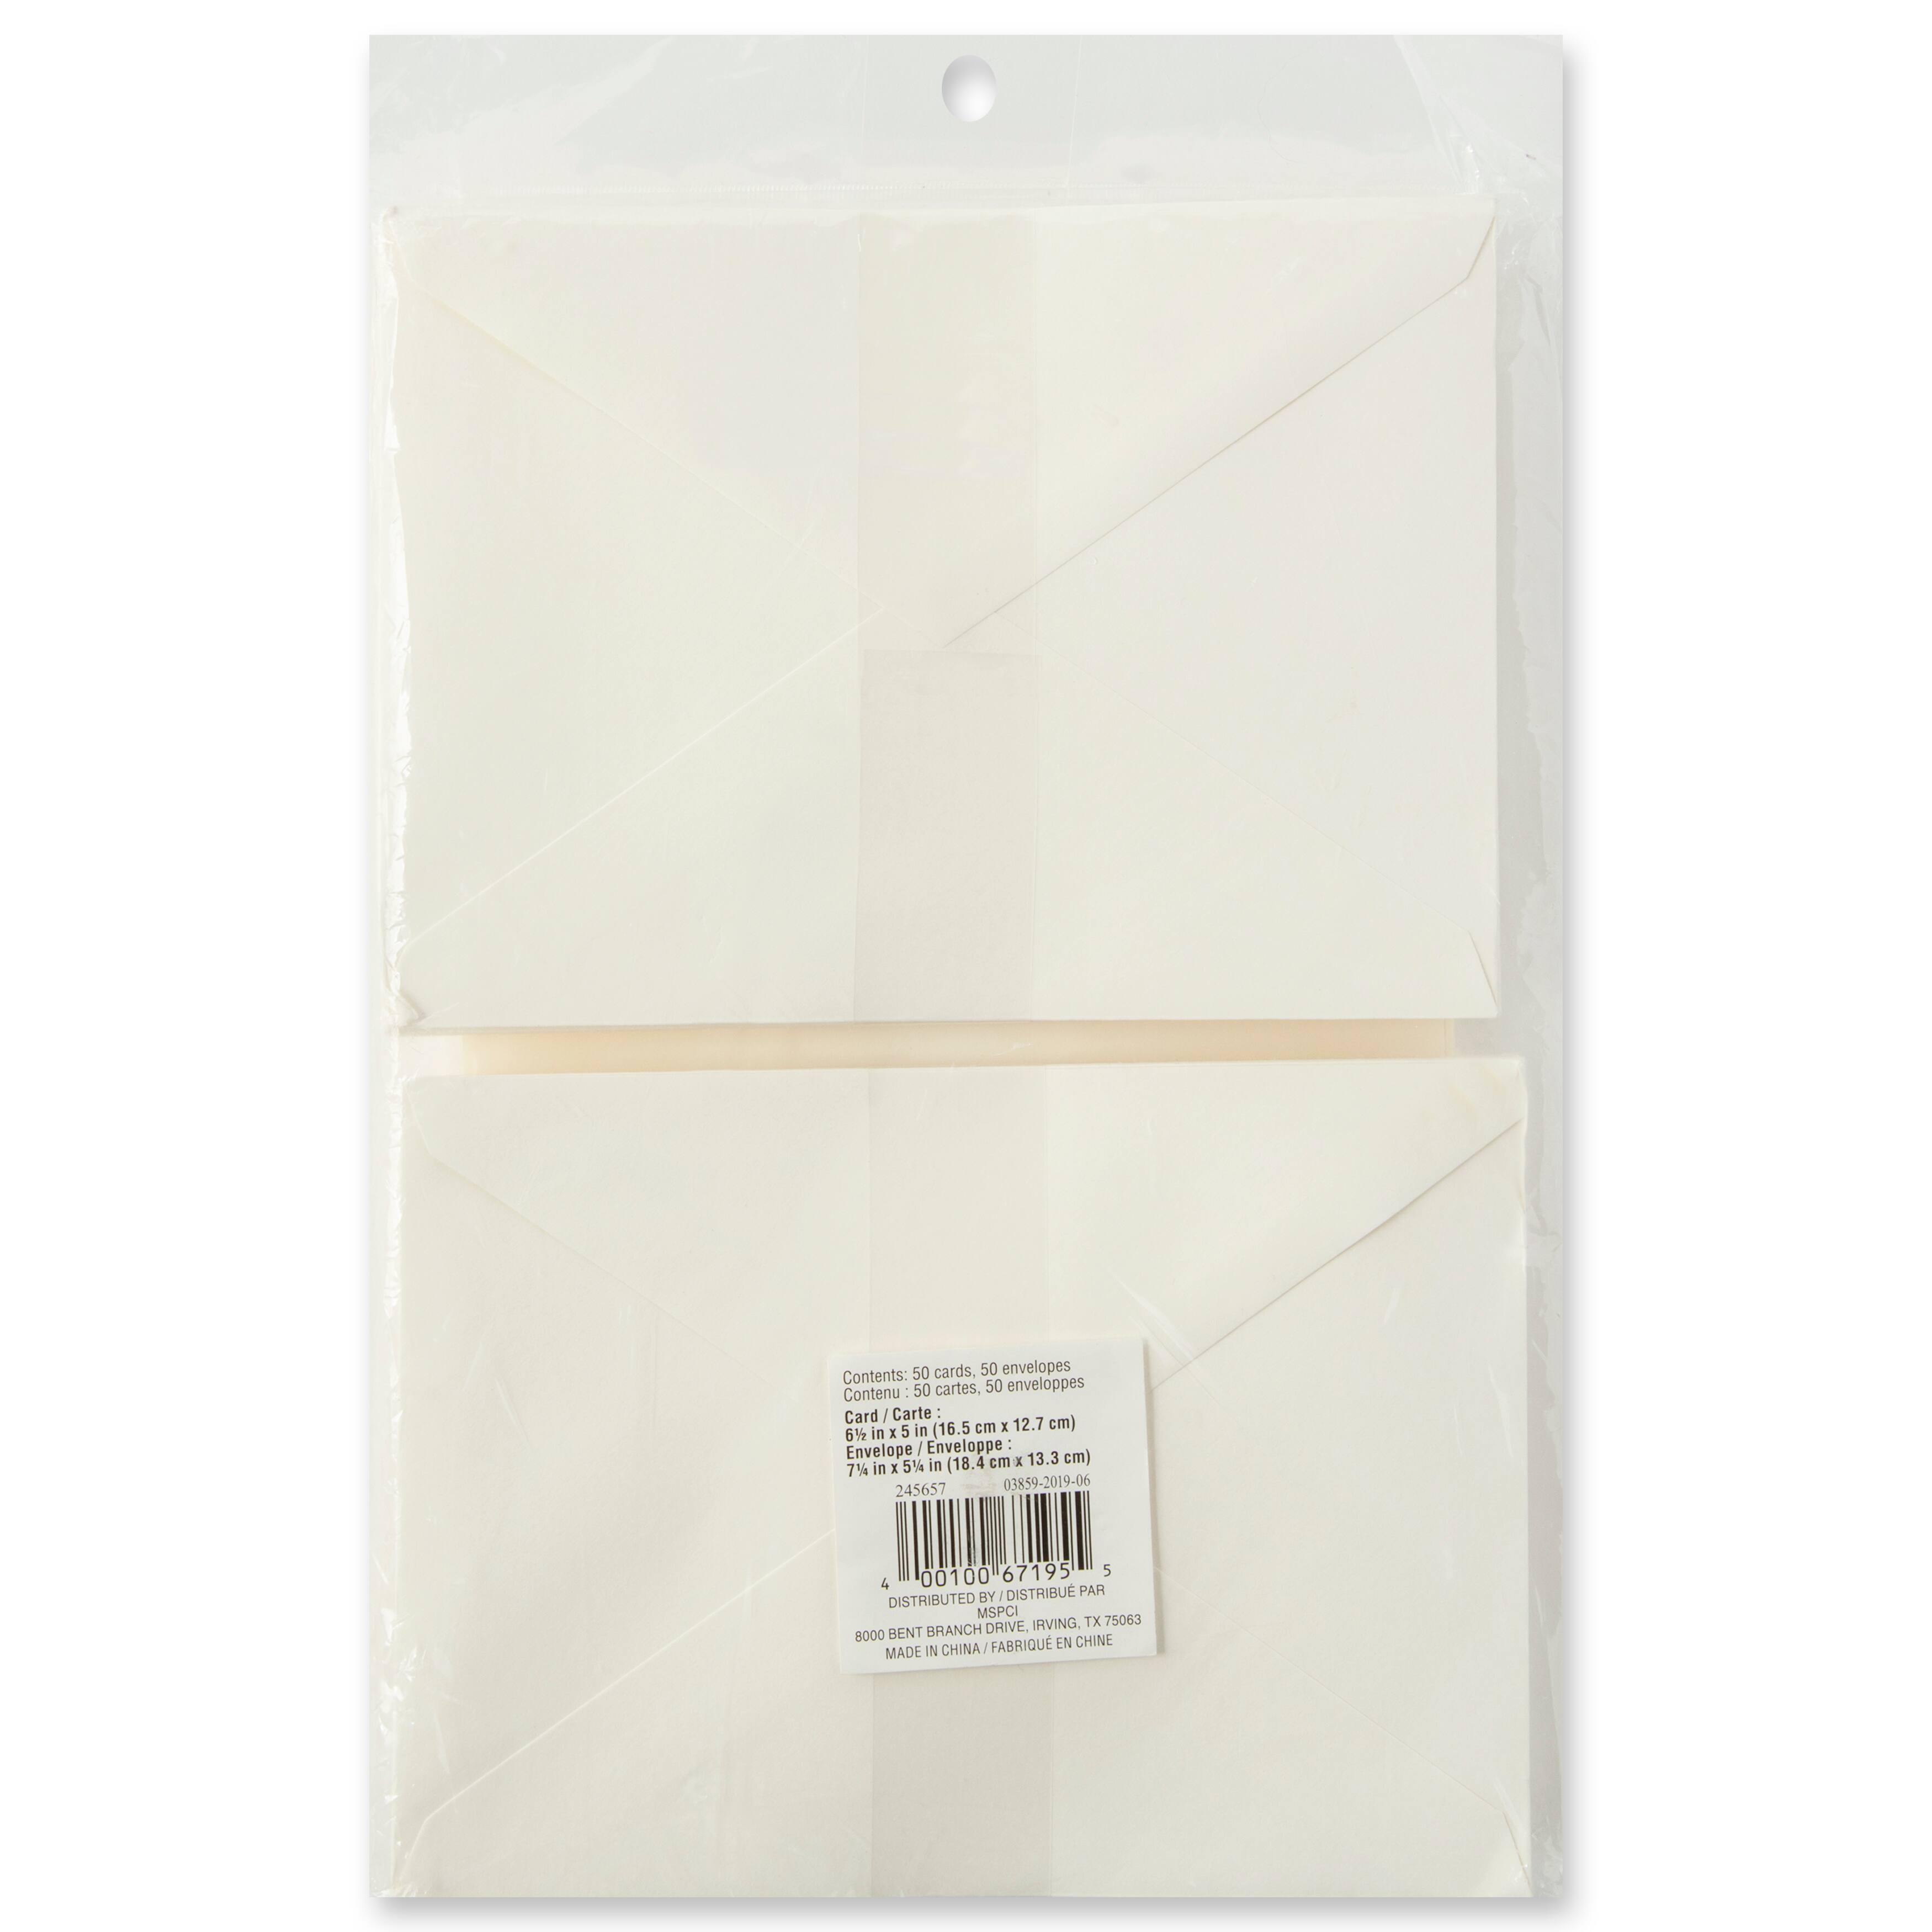 Value Pack Cards & Envelopes by Recollections®